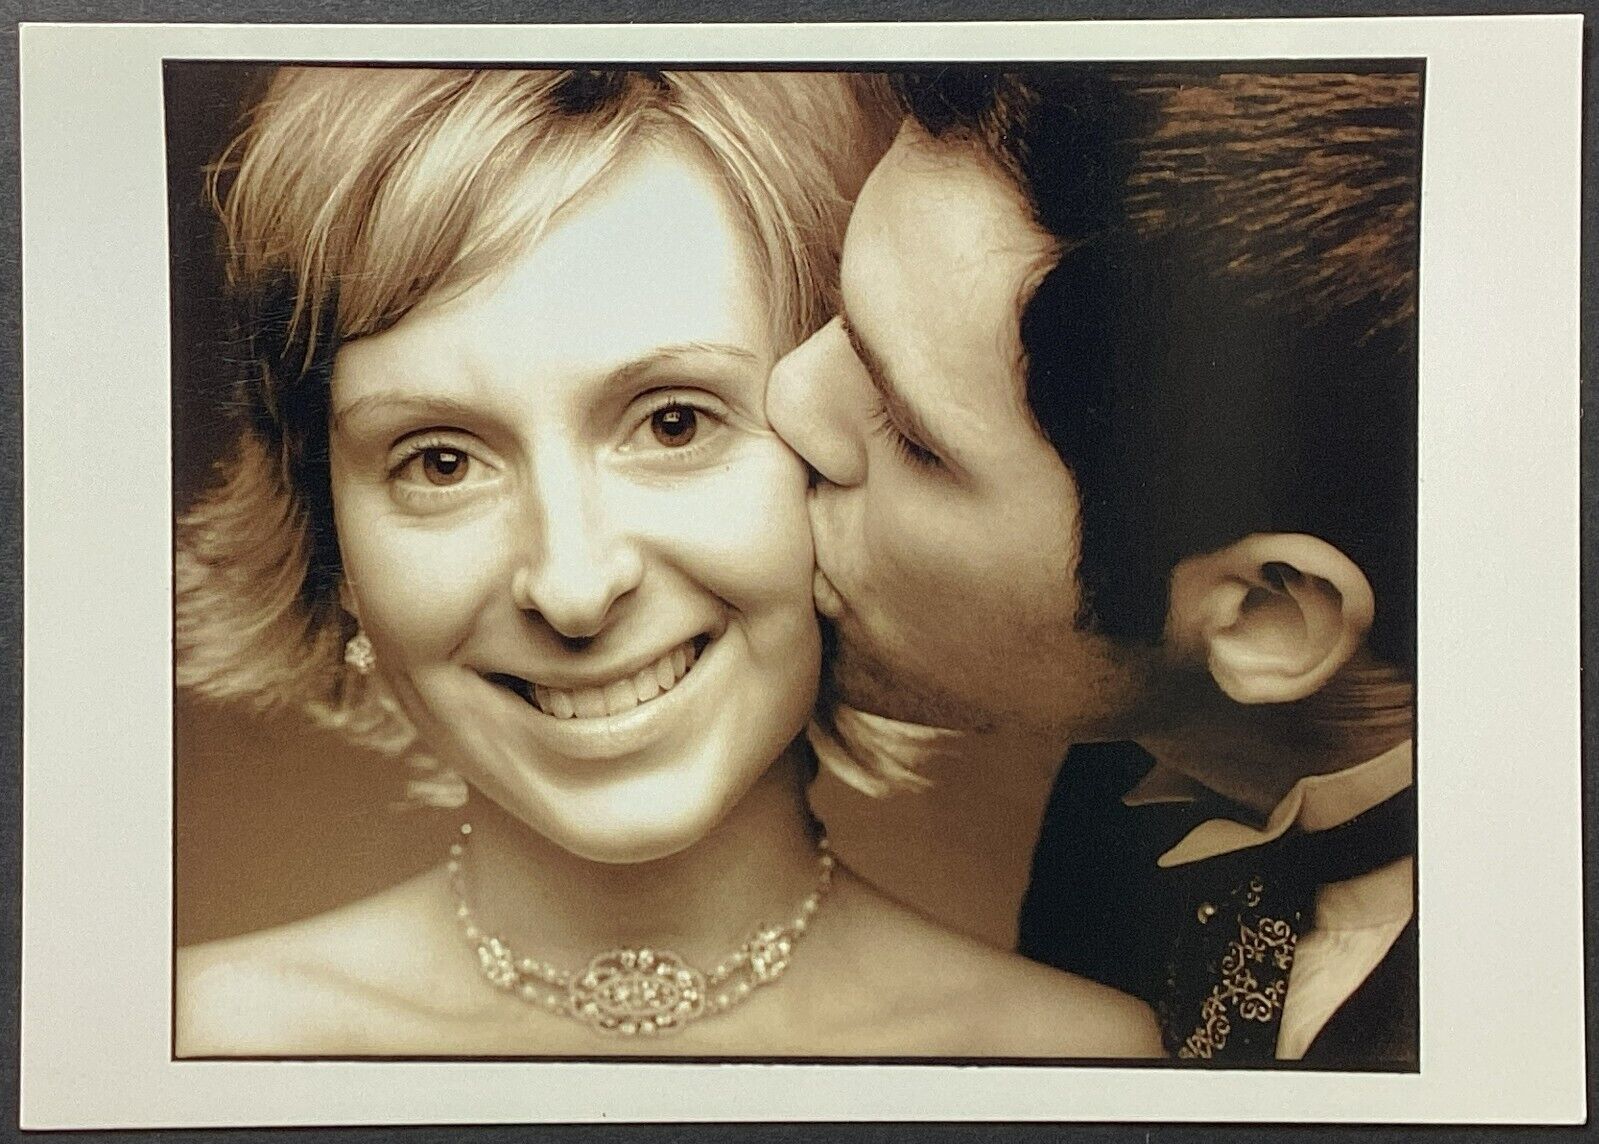 Man Kissing Woman Francis Ford Photography Promo Postcard Unposted